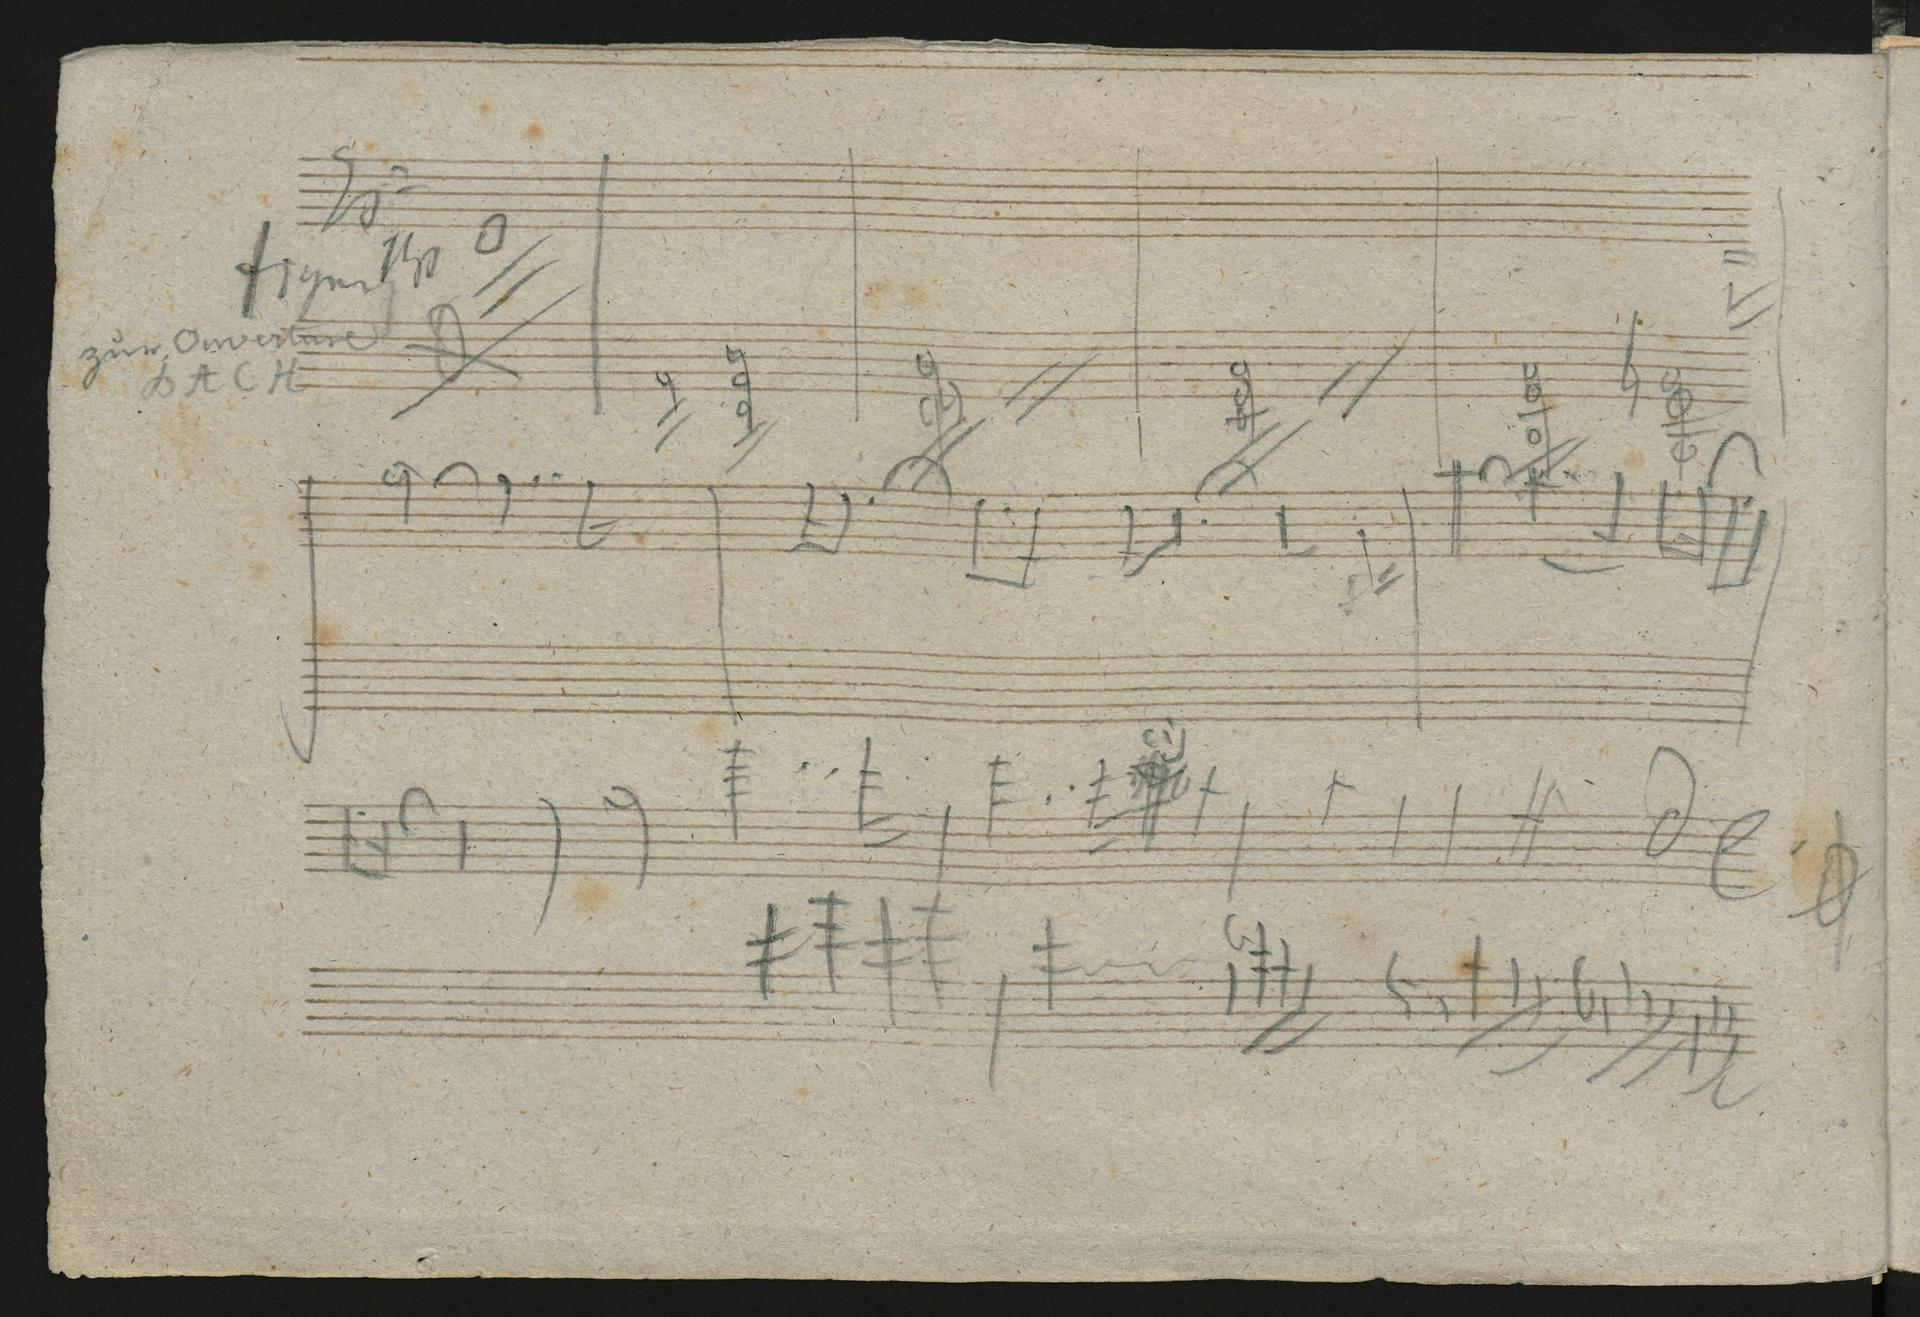 Manuscript score with musical notes jotted on it.